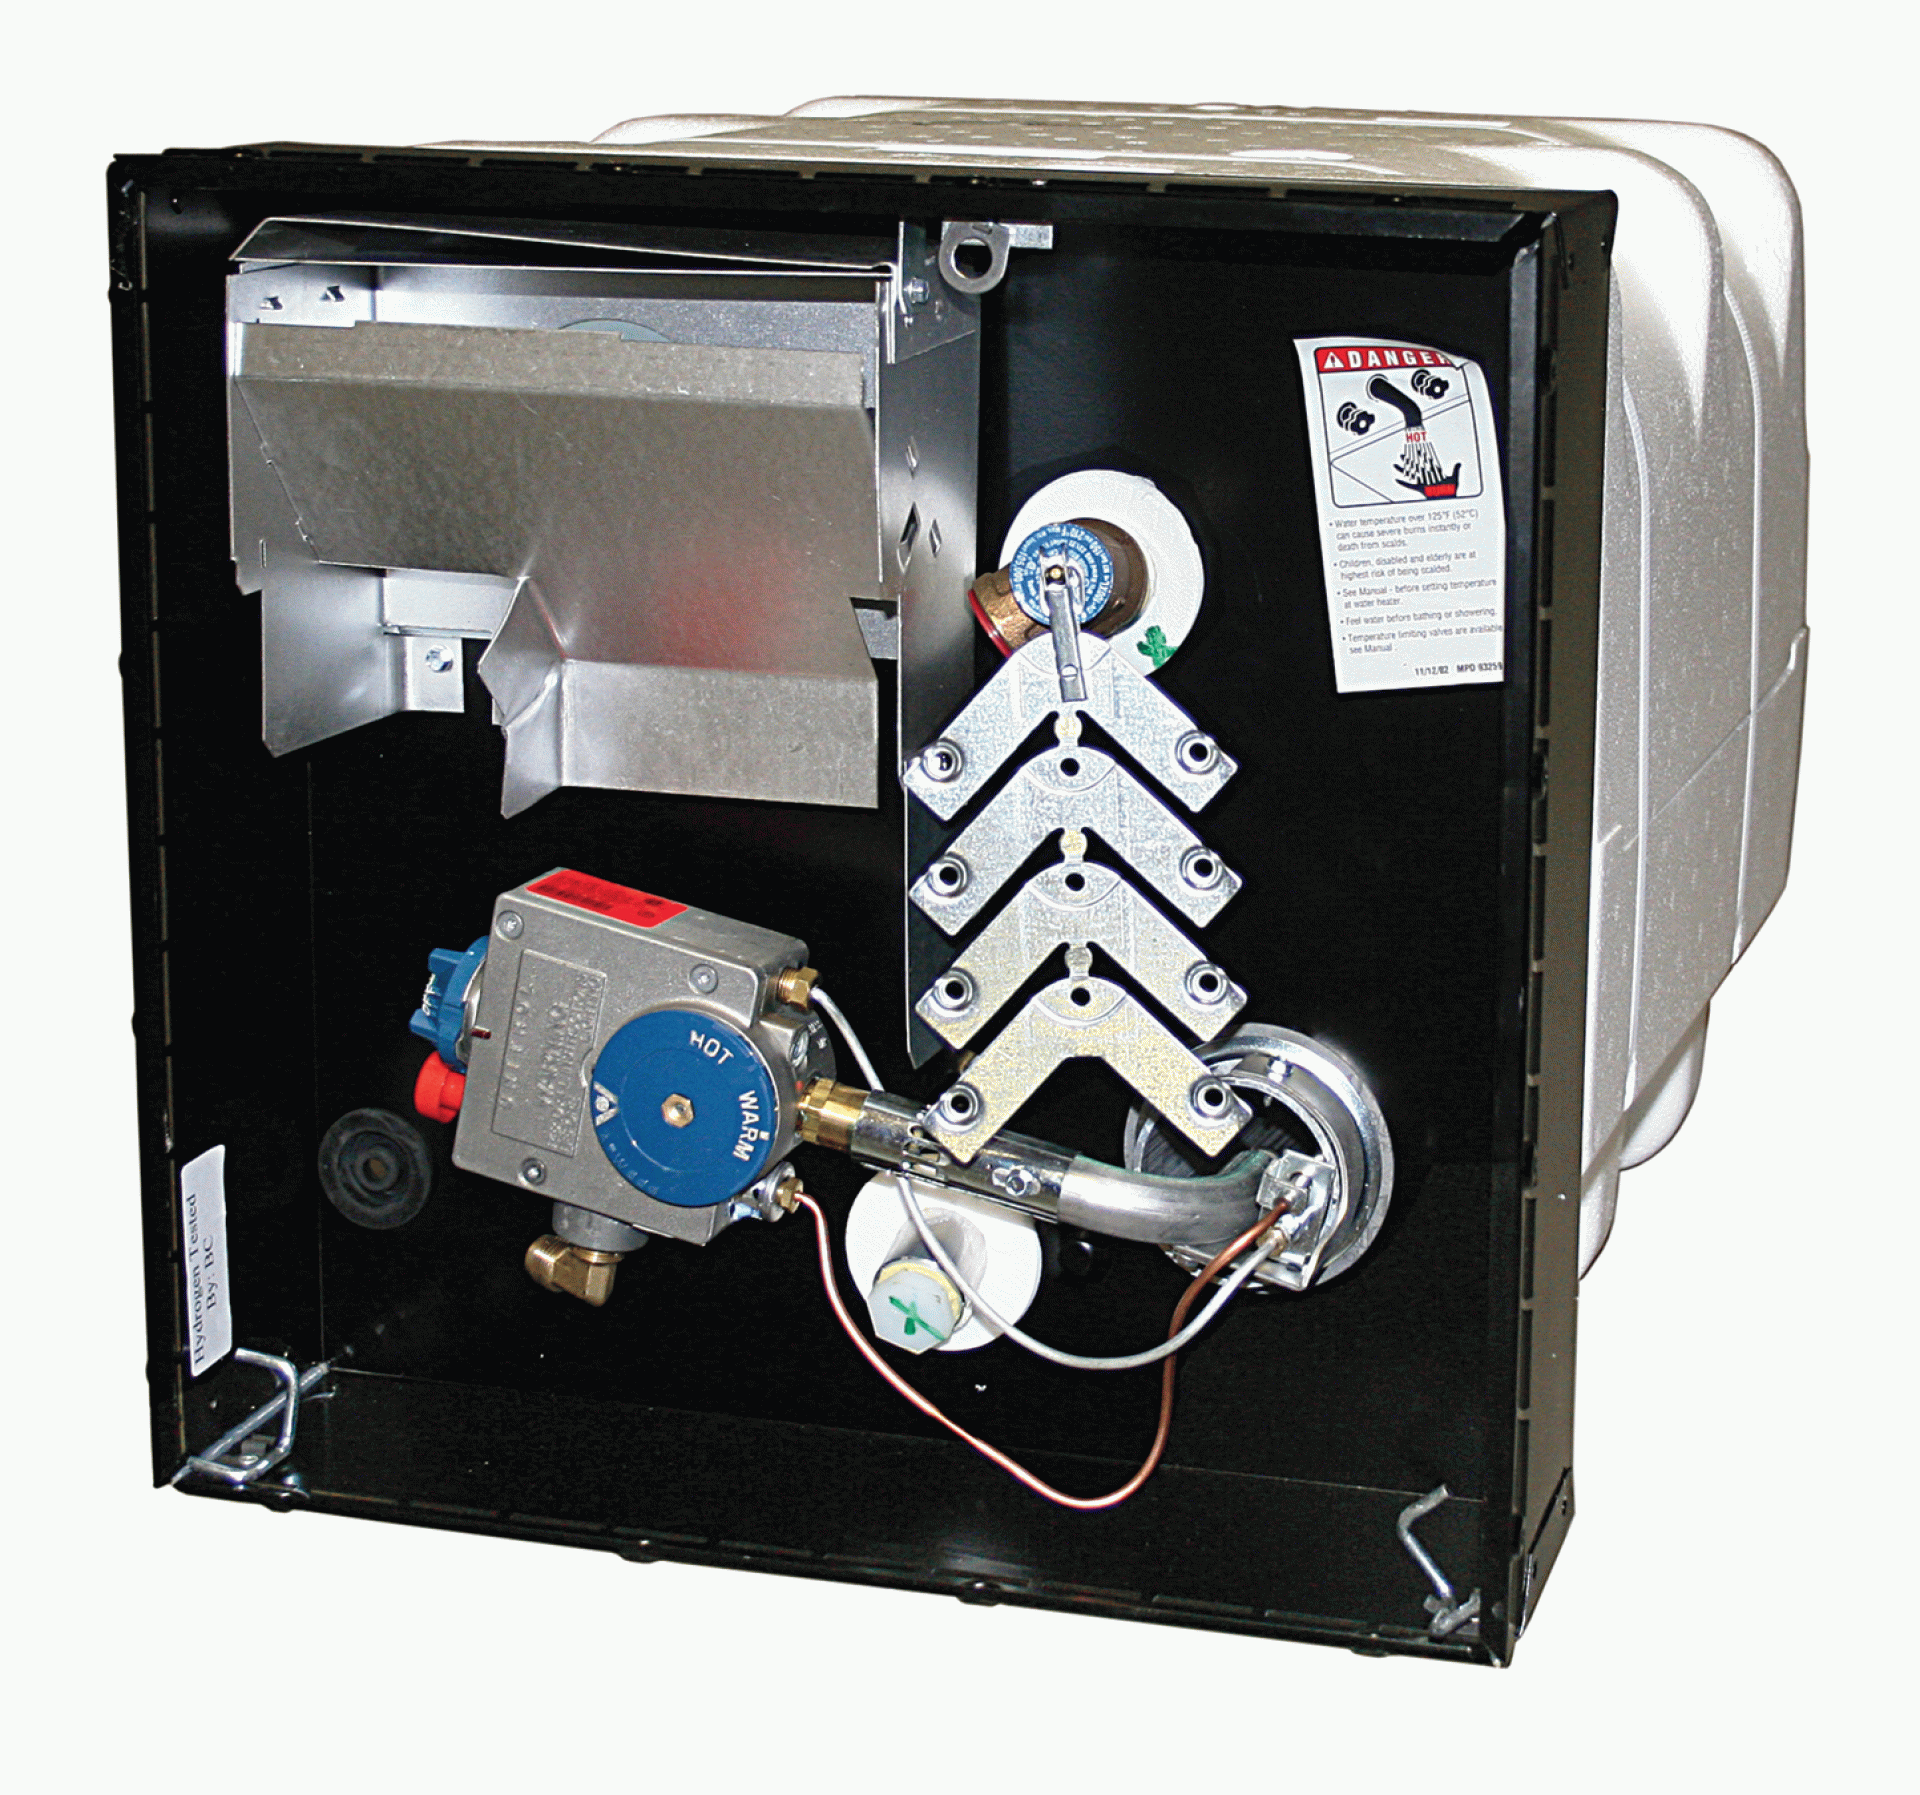 ATWOOD MOBILE PRODUCTS LLC | 94180 | WATER HEATER - G10-2: LP GAS WATER HEATER